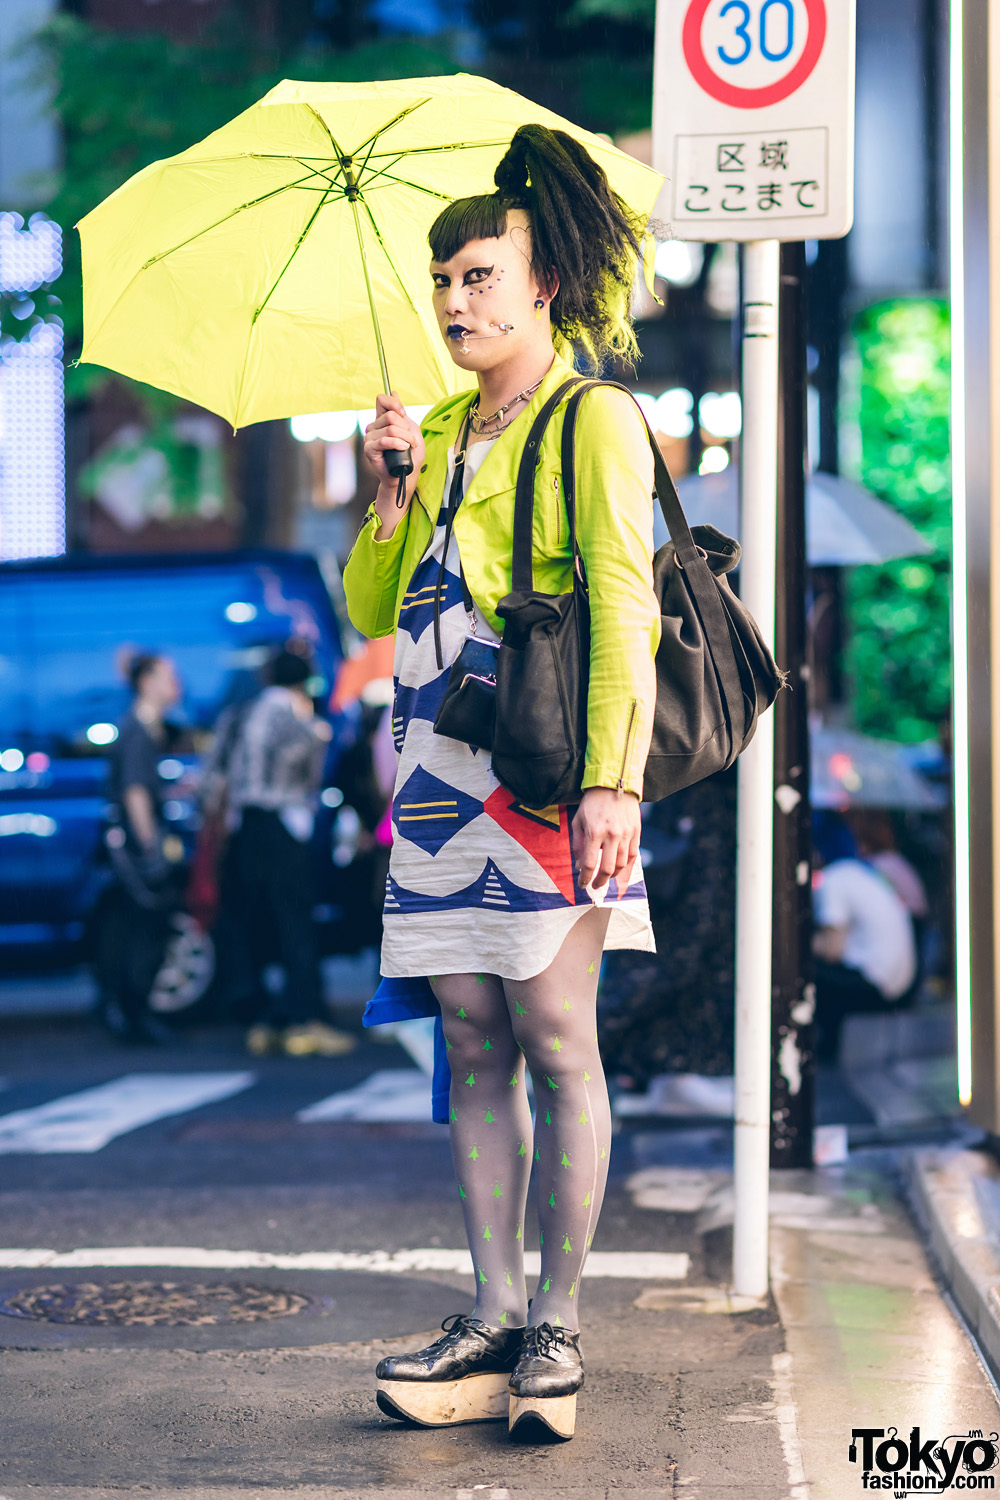 Japanese Vintage Fashion Buyer & Model in Vivienne Westwood Streetwear Style w/ Safety Pin Cheek Piercing, Tripp NYC Cropped Jacket, Printed Tunic Dress, Sheer Stockings & Rocking Horse Shoes